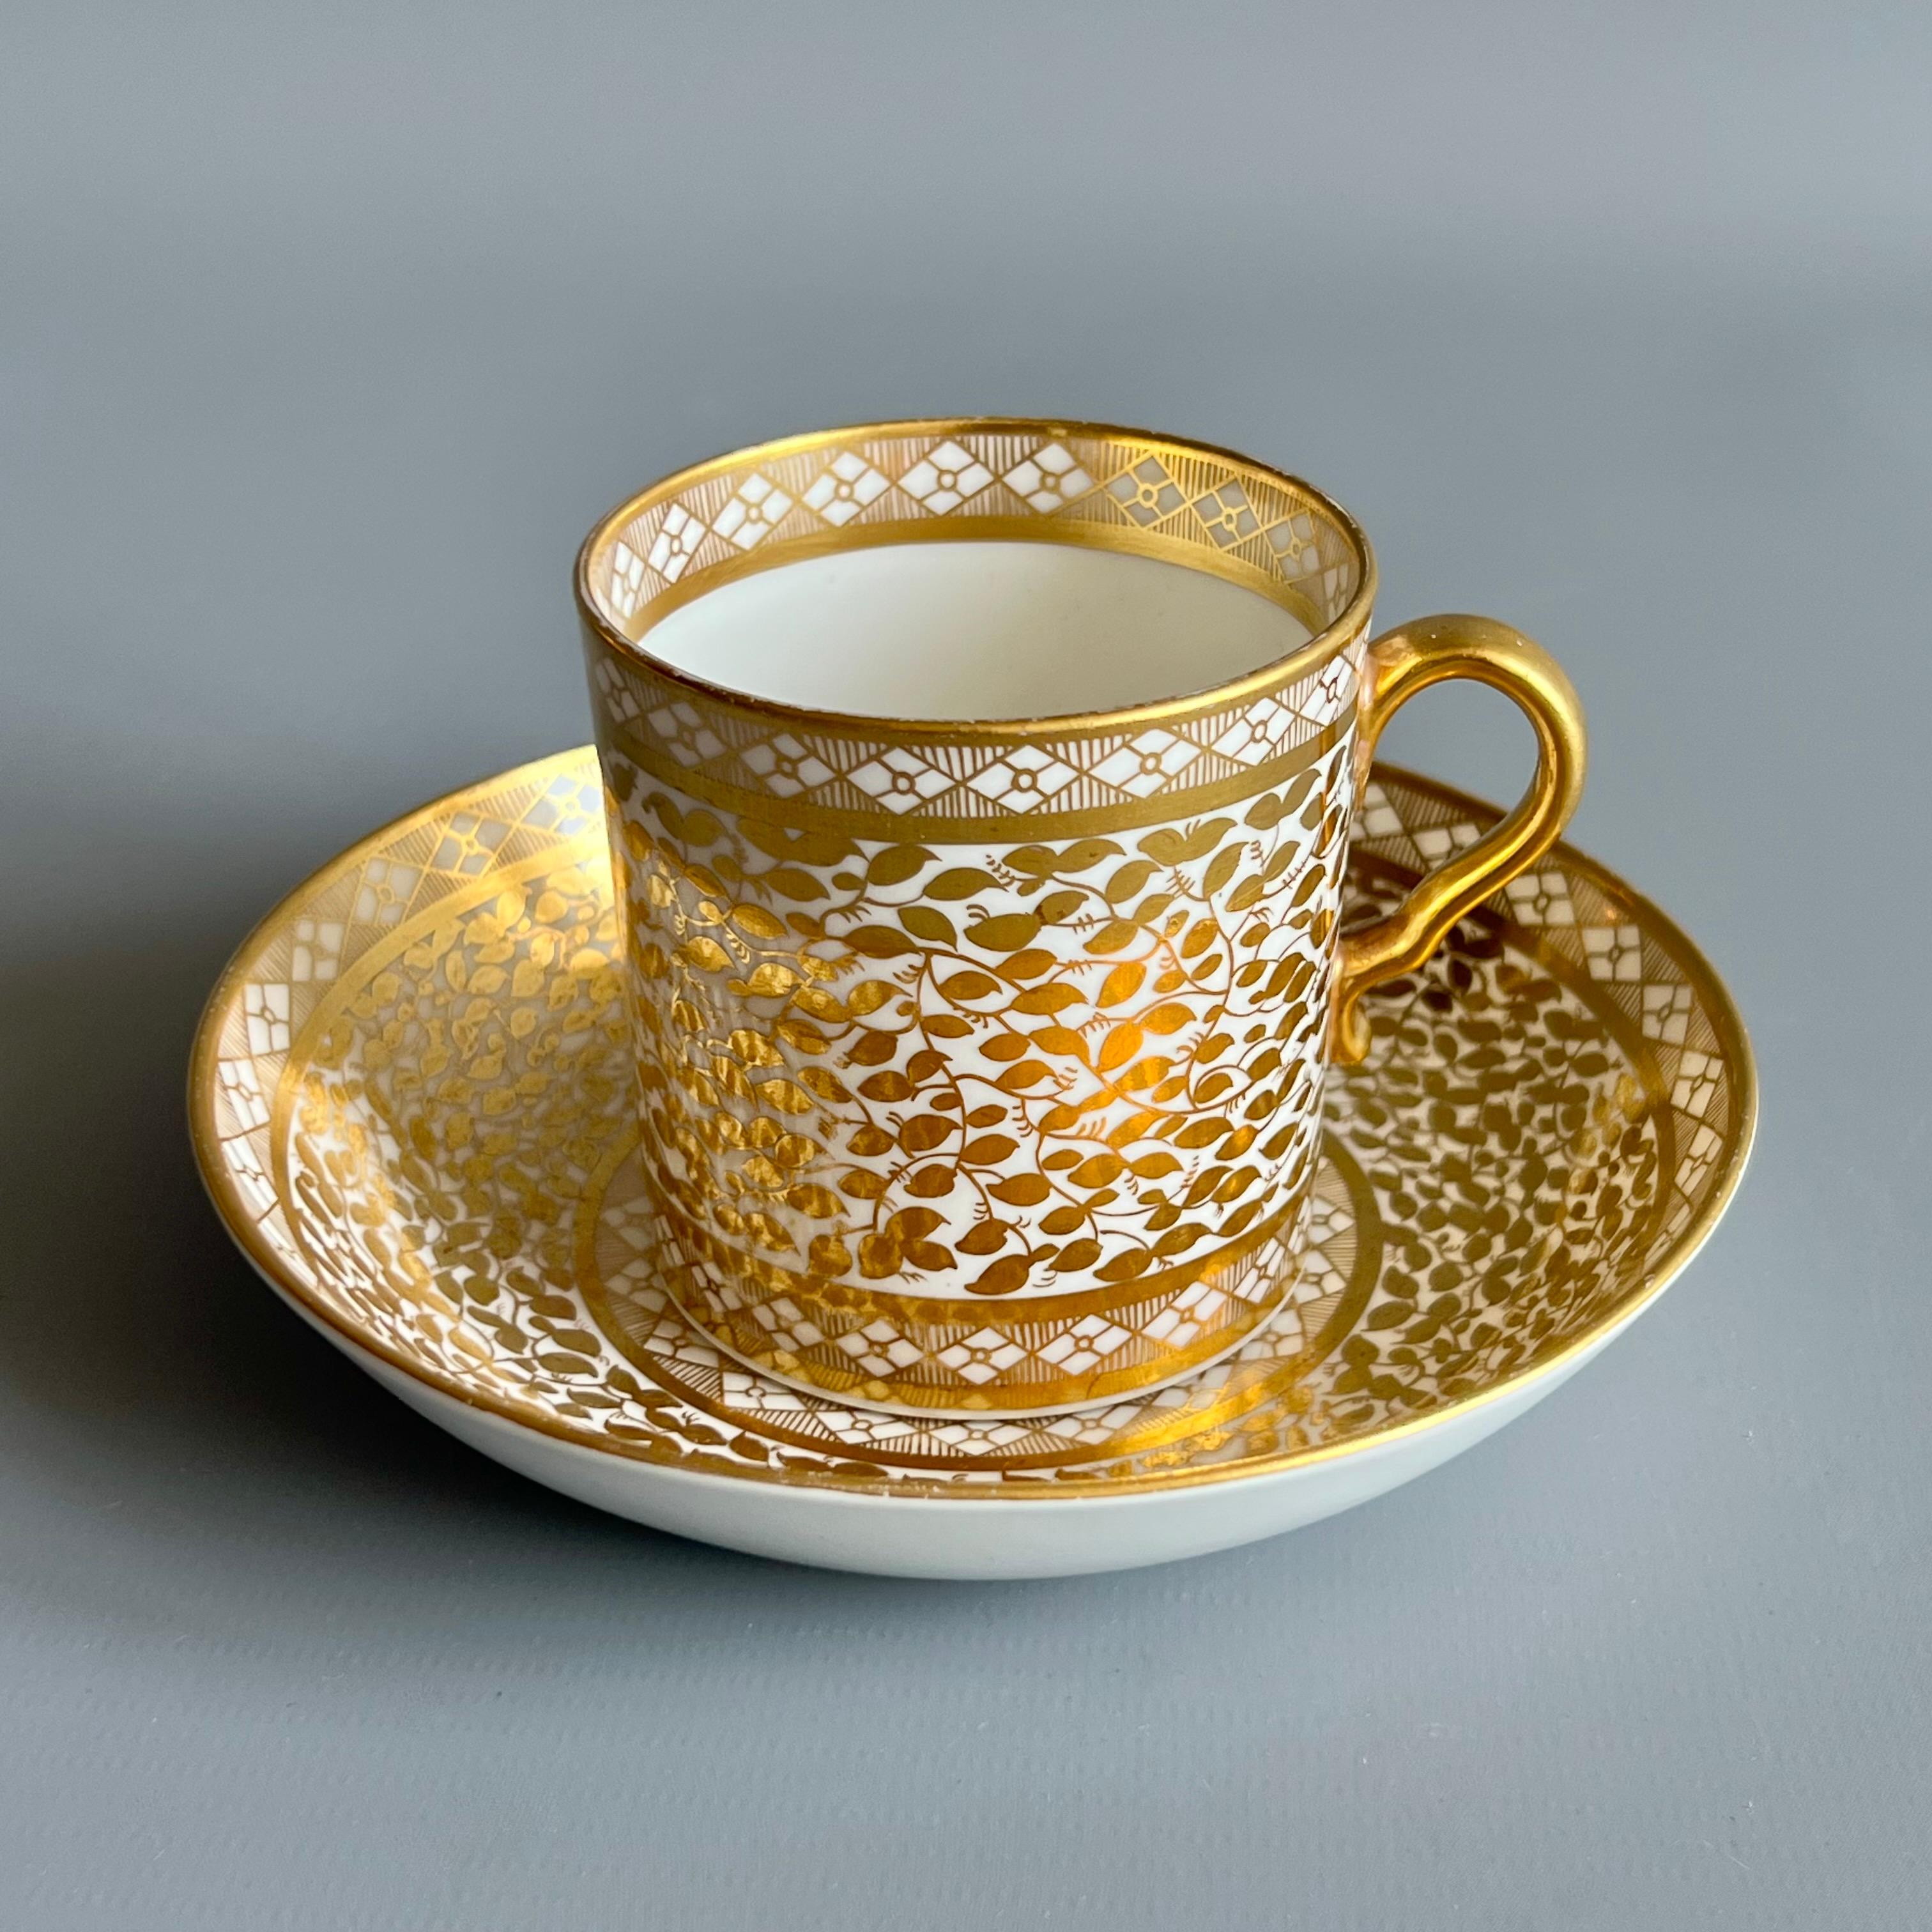 This is a beautiful coffee can and saucer made by Spode around 1804. The set is decorated in a stunning pattern of dense gilt foliage in the Neoclassical taste.

Josiah Spode was the great pioneer among the Georgian potters in England. Around the